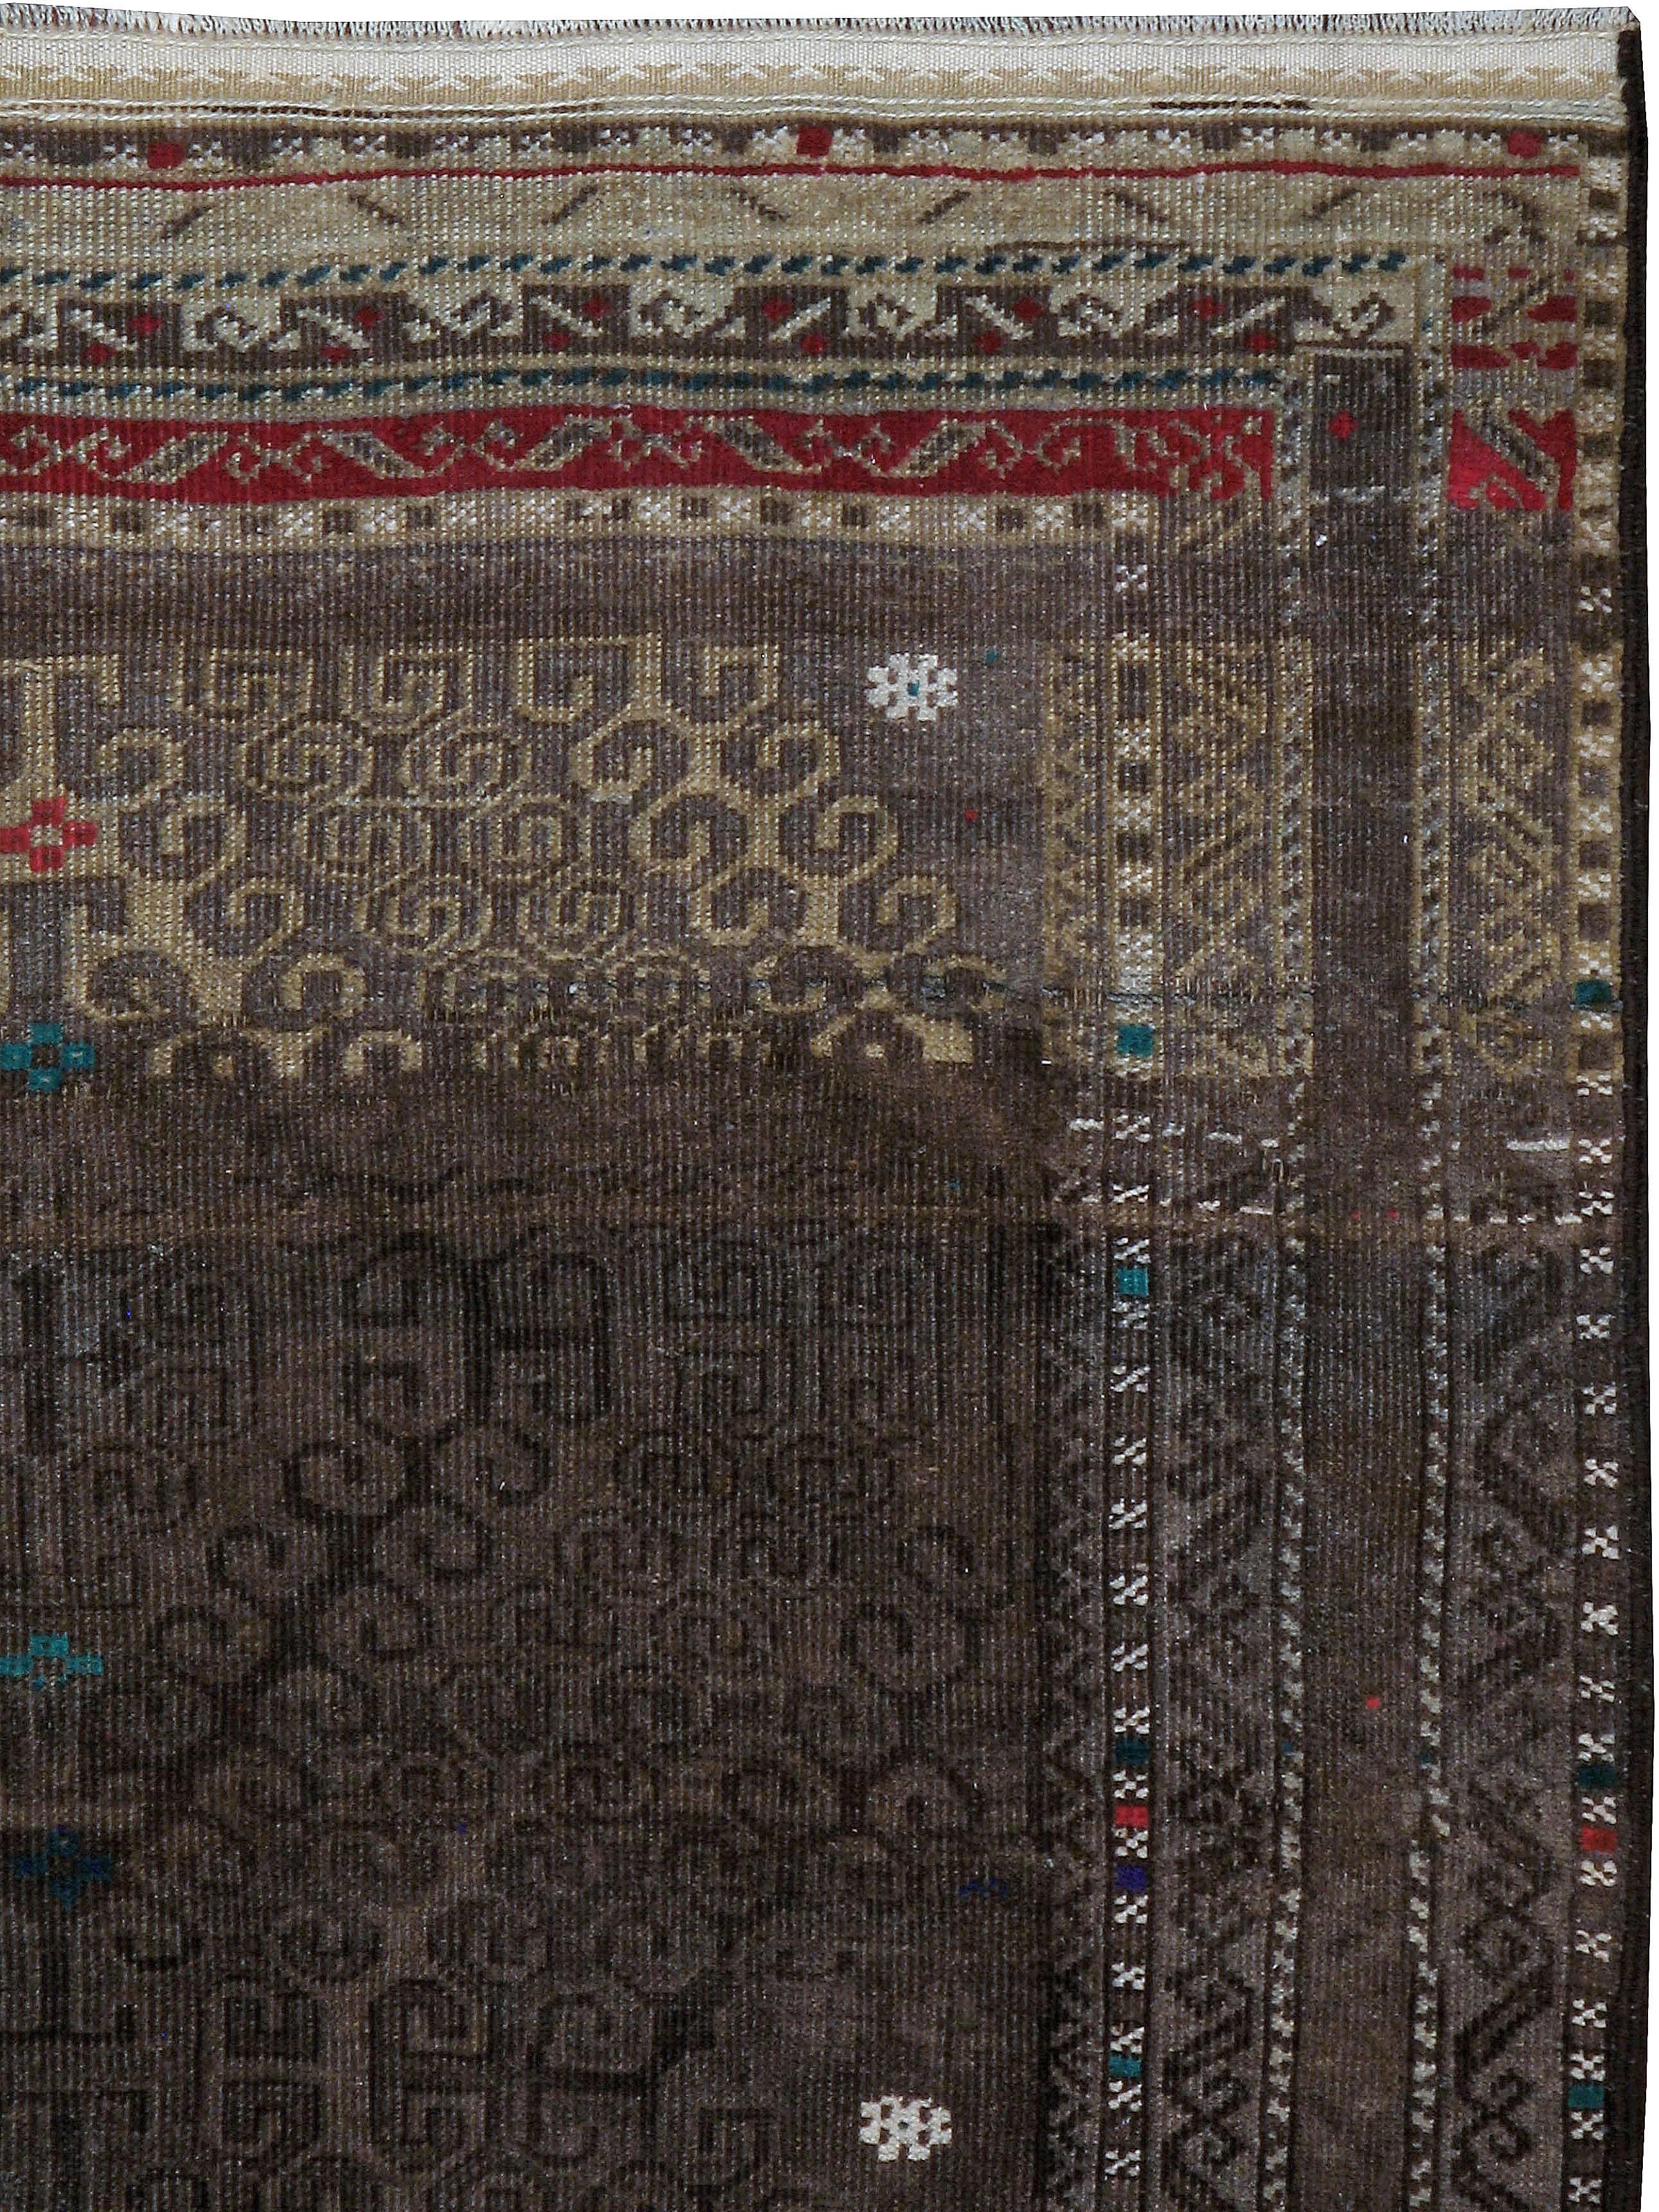 A vintage Persian Baluch carpet from the mid-20th century.